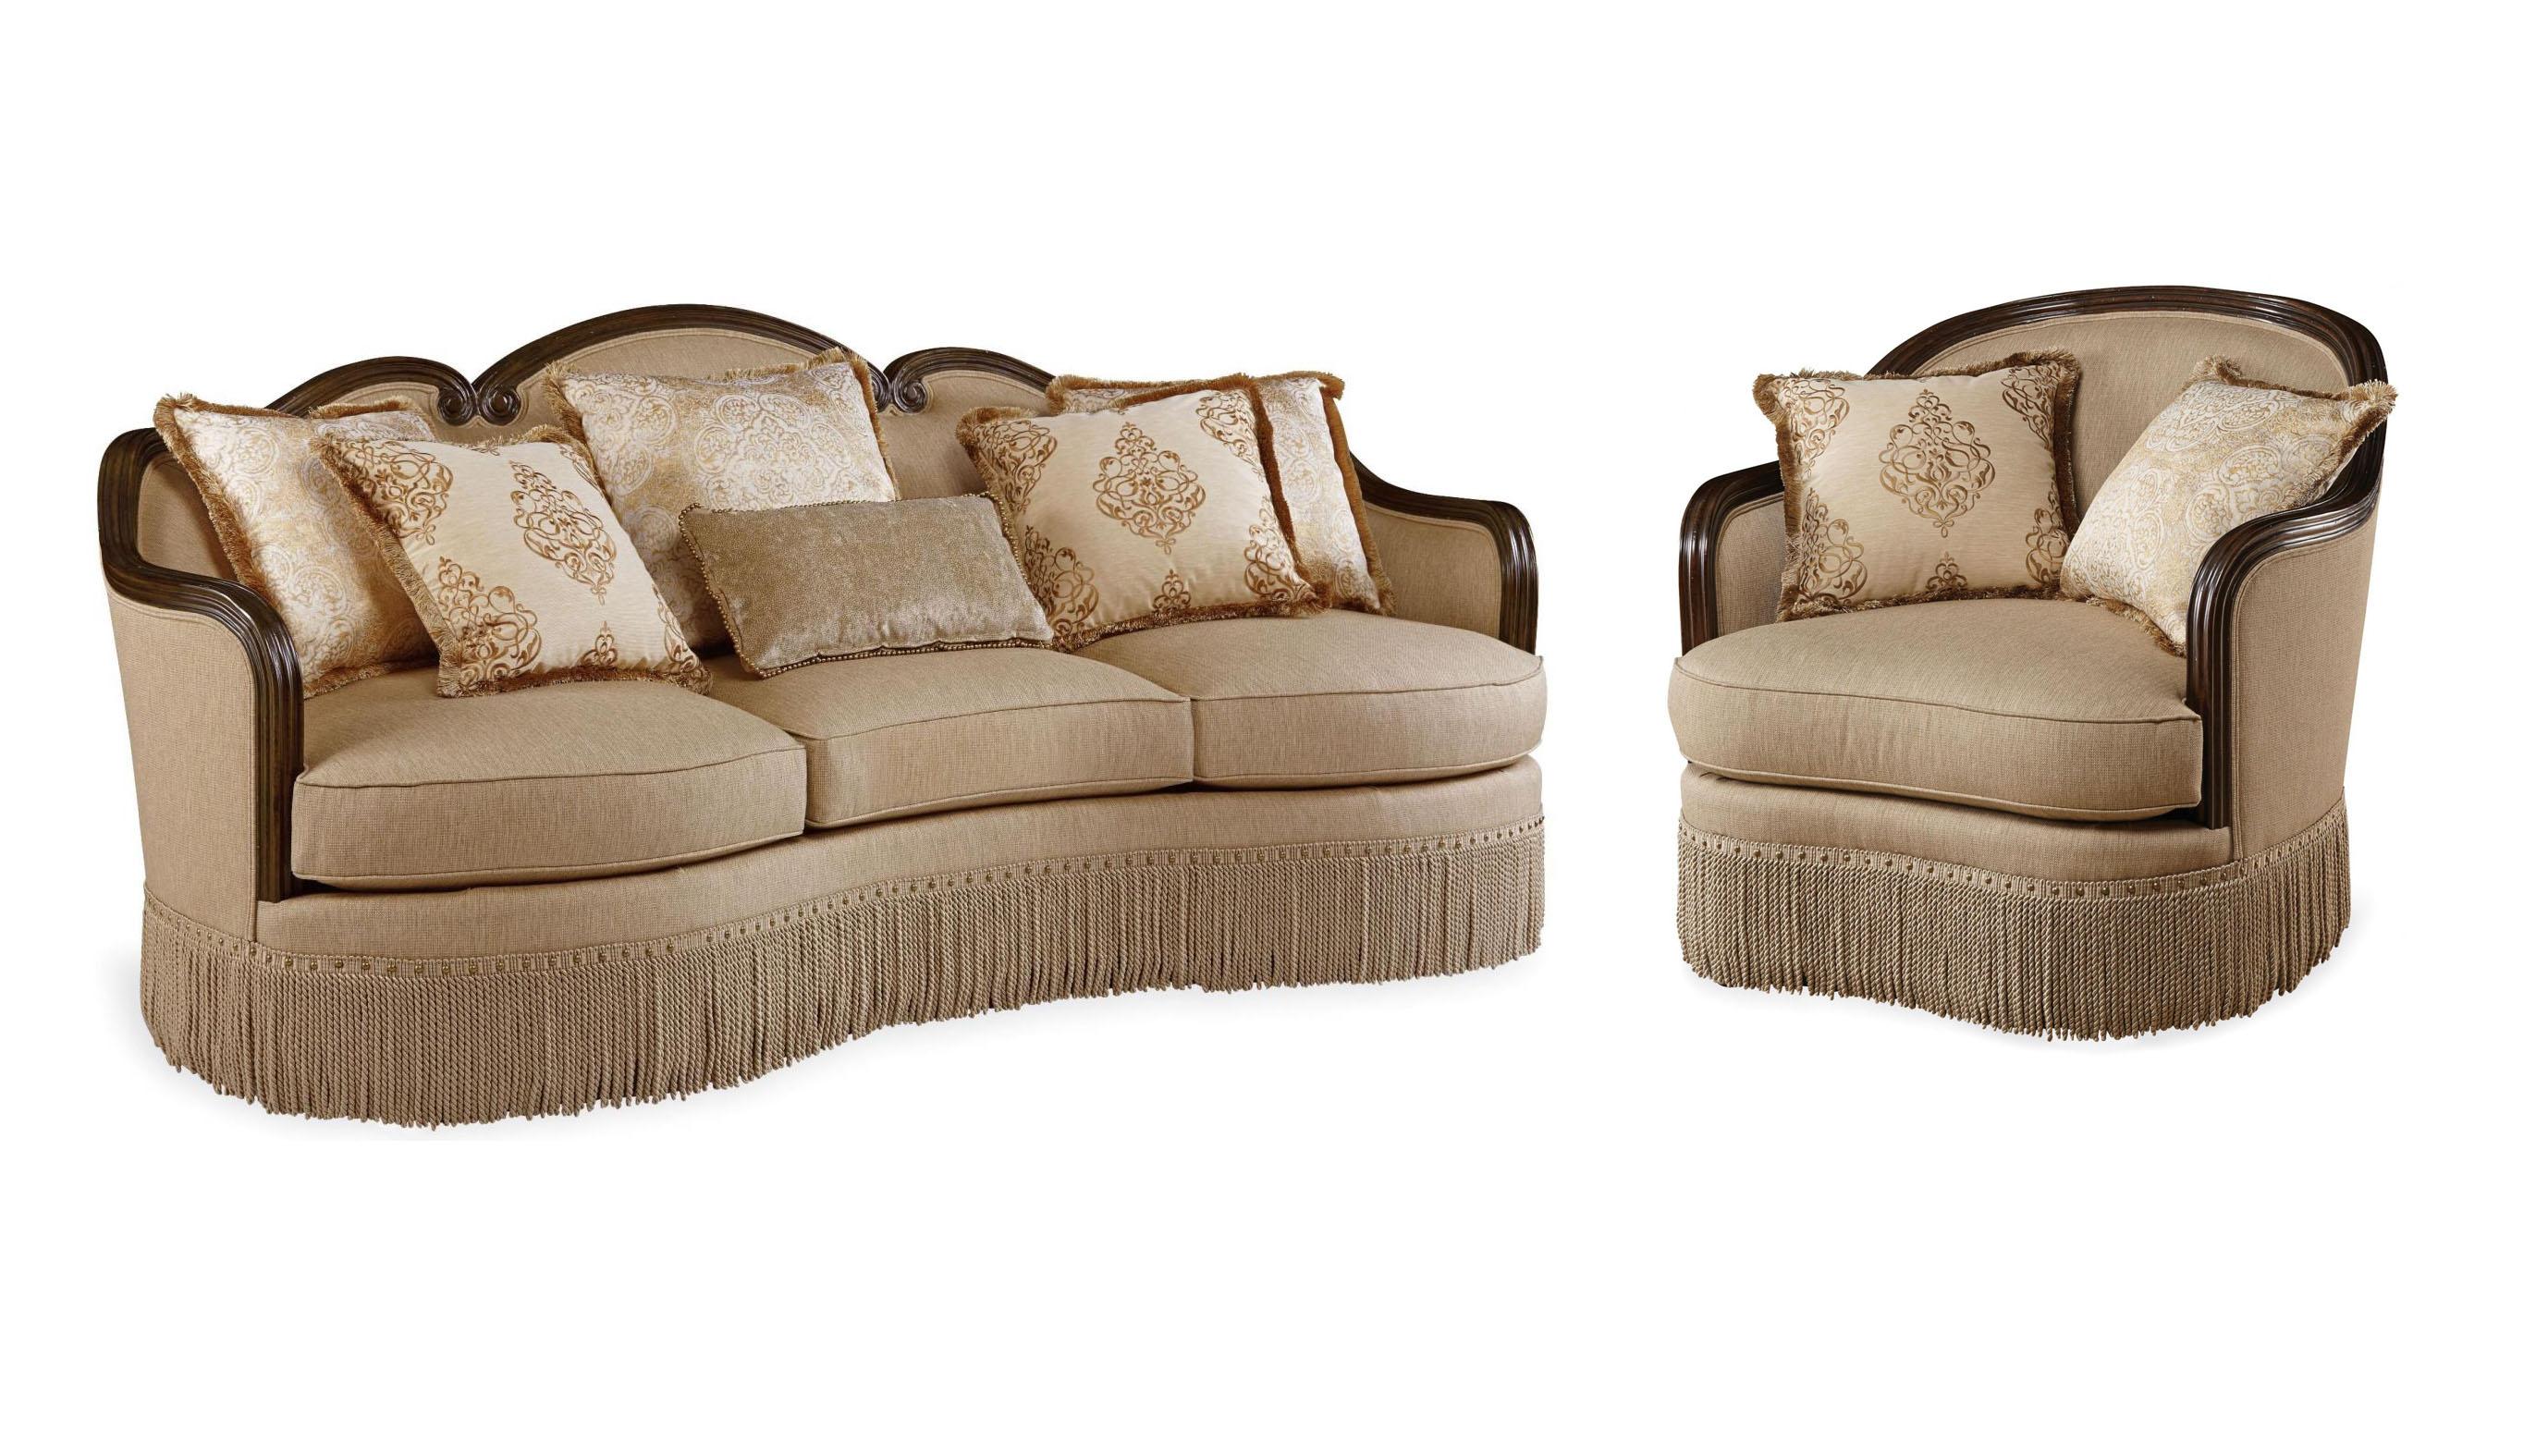 

    
Contemporary Brown & Beige Sofa + Chair by A.R.T. Furniture Giovanna
